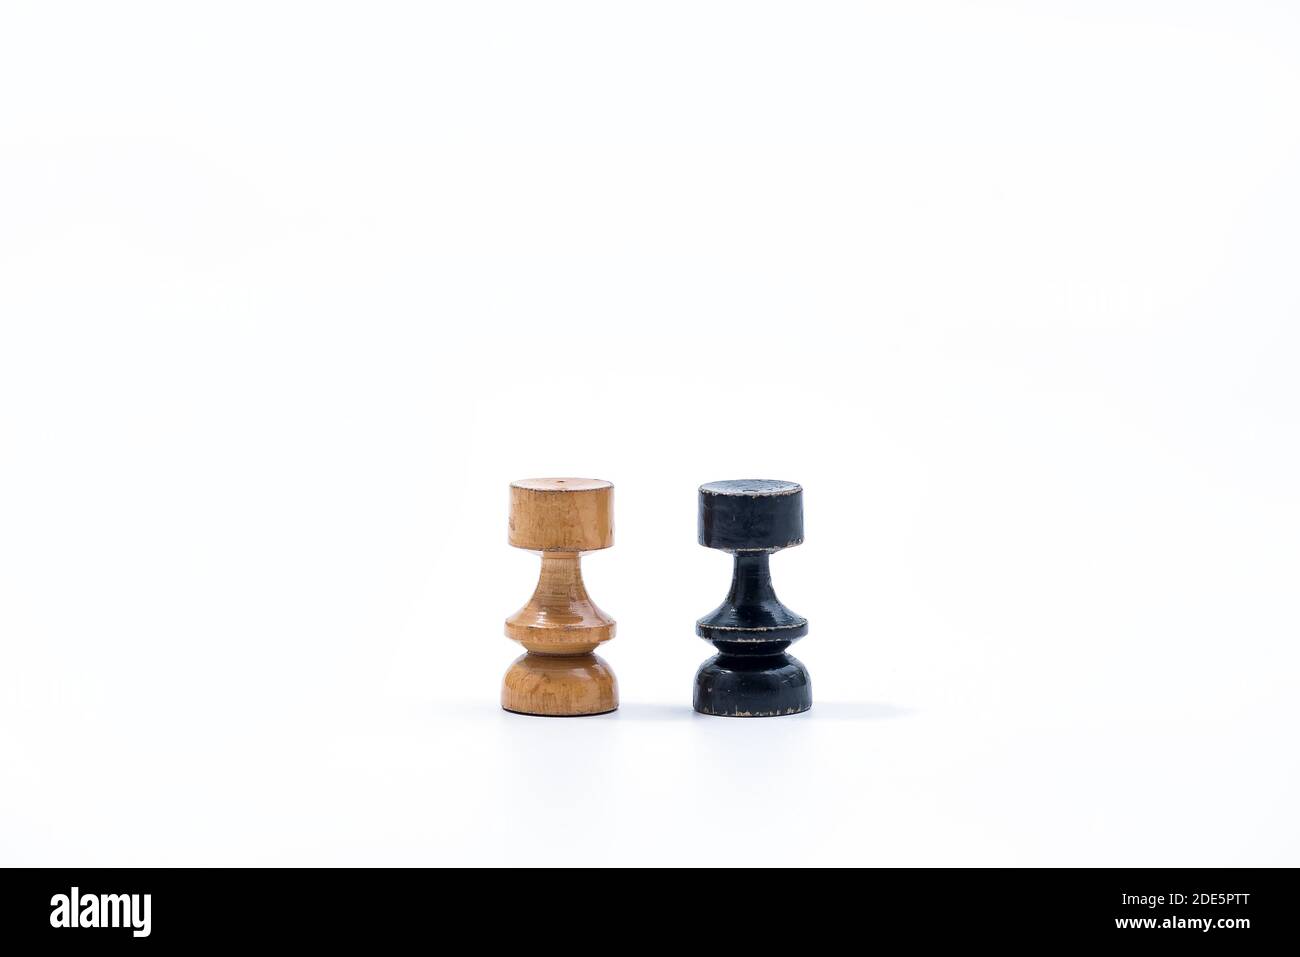 Old Chess Set - Rooks pieces on a white background with copy space Stock Photo